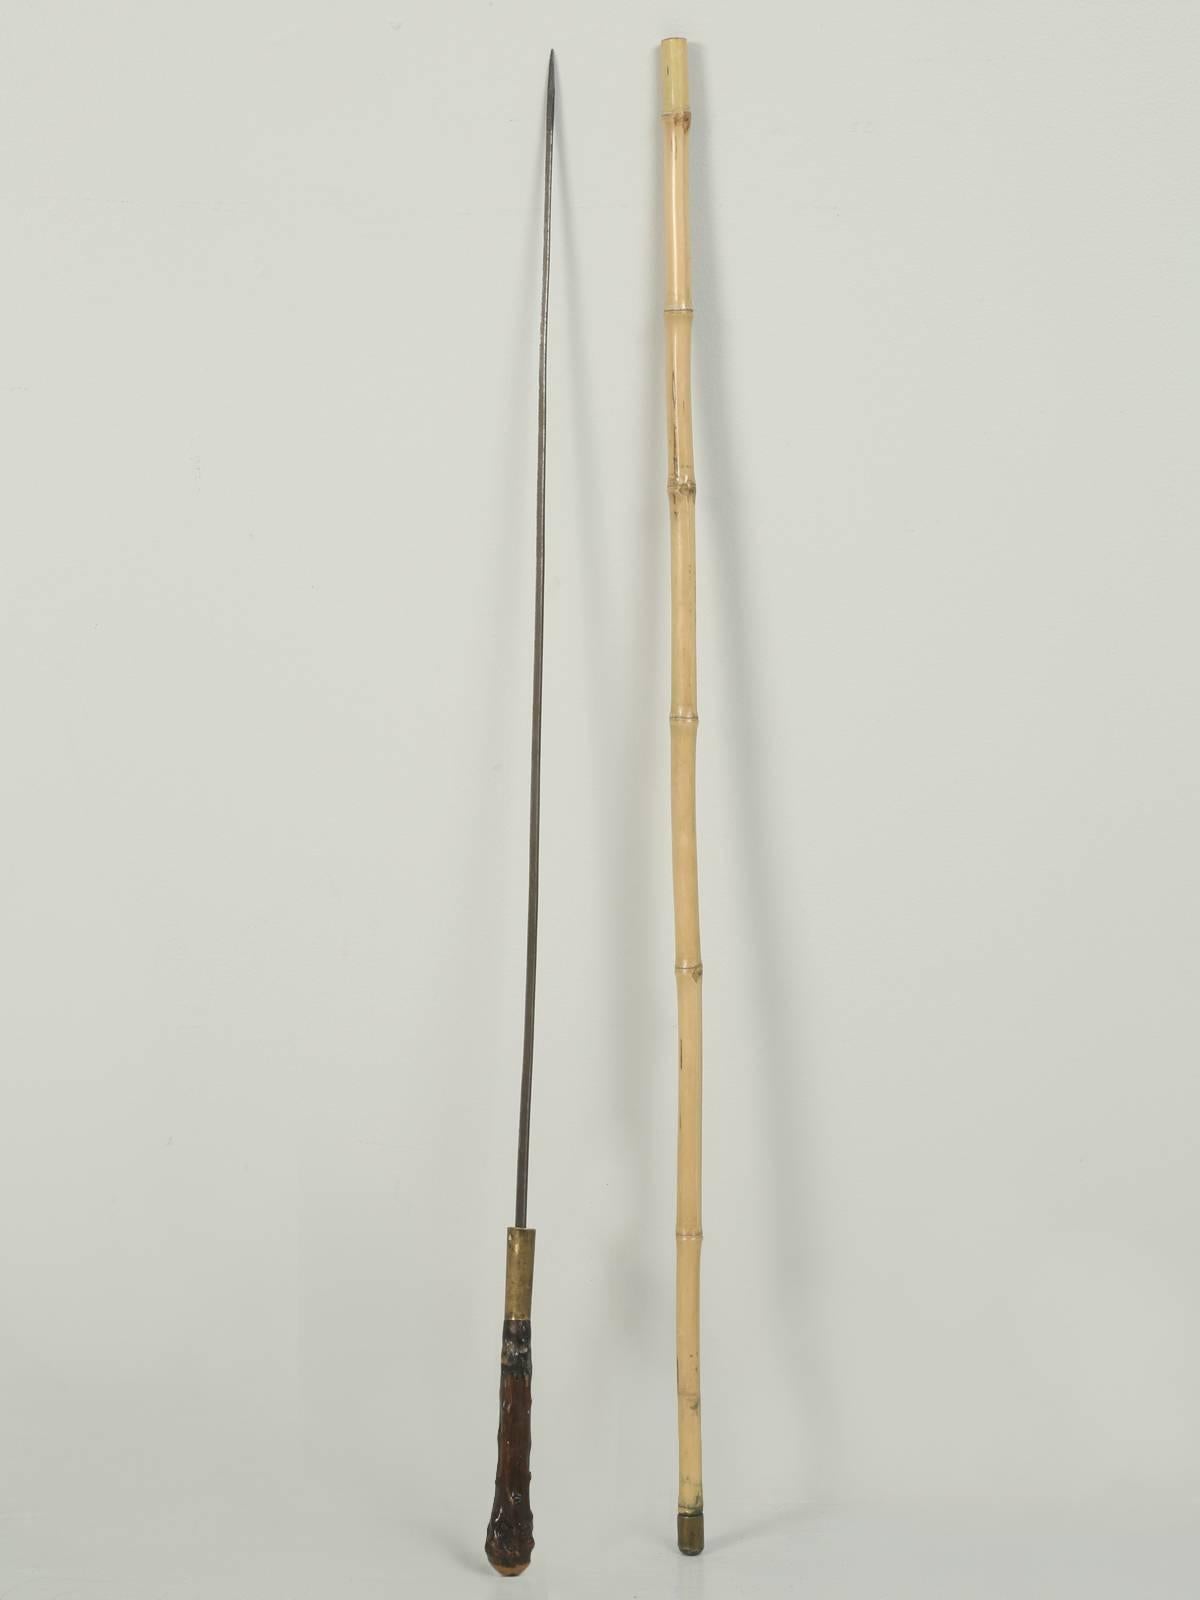 Early 20th Century Antique French Walking Stick or Cane, from Bamboo with a Hidden Sword Inside